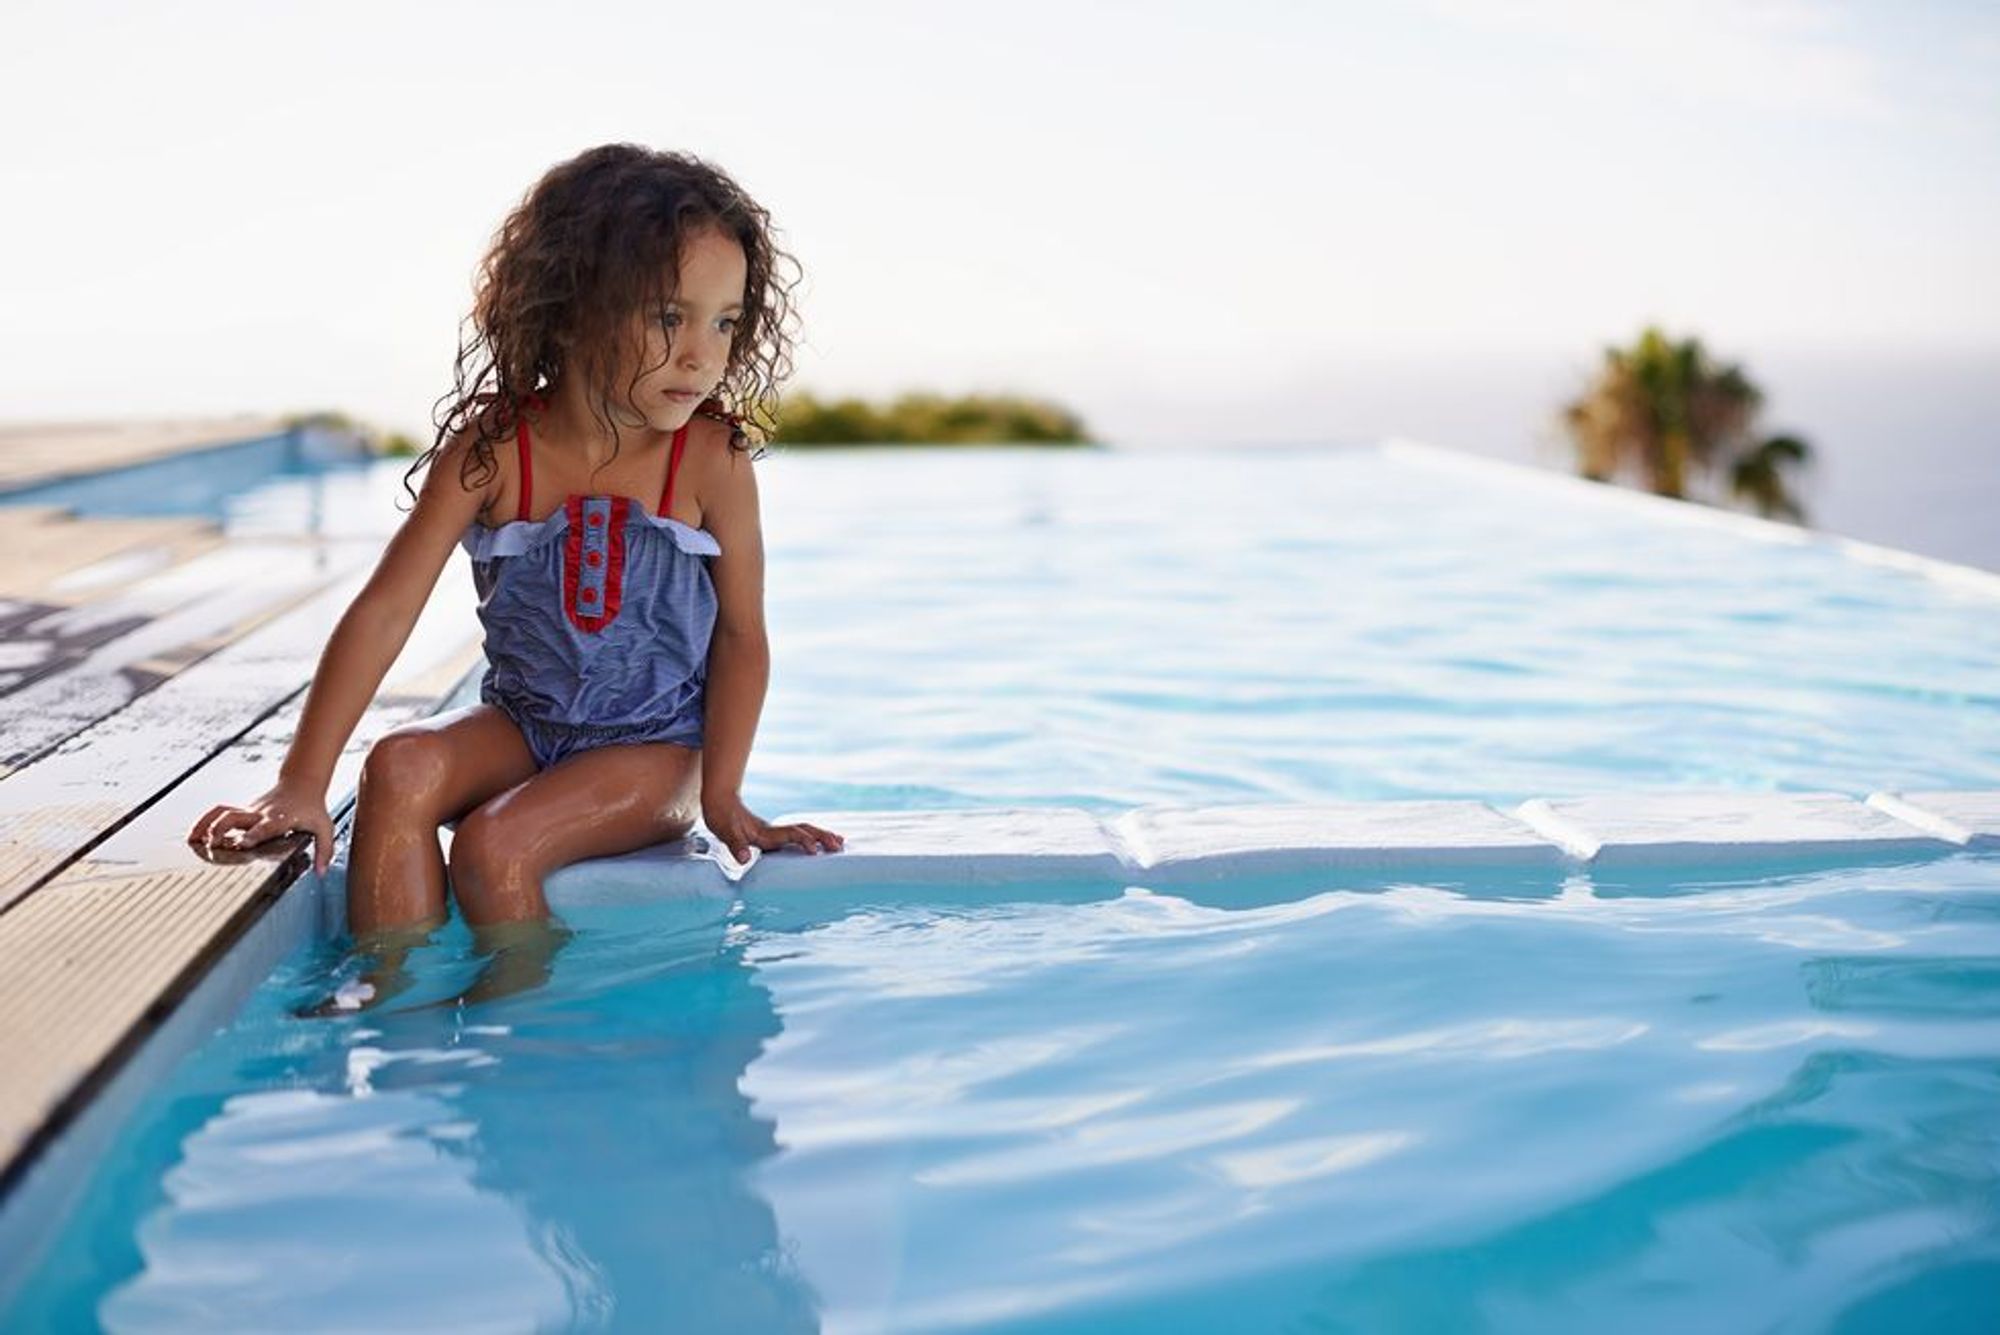 Know the Signs of Dry and Secondary Drowning - HealthyWomen